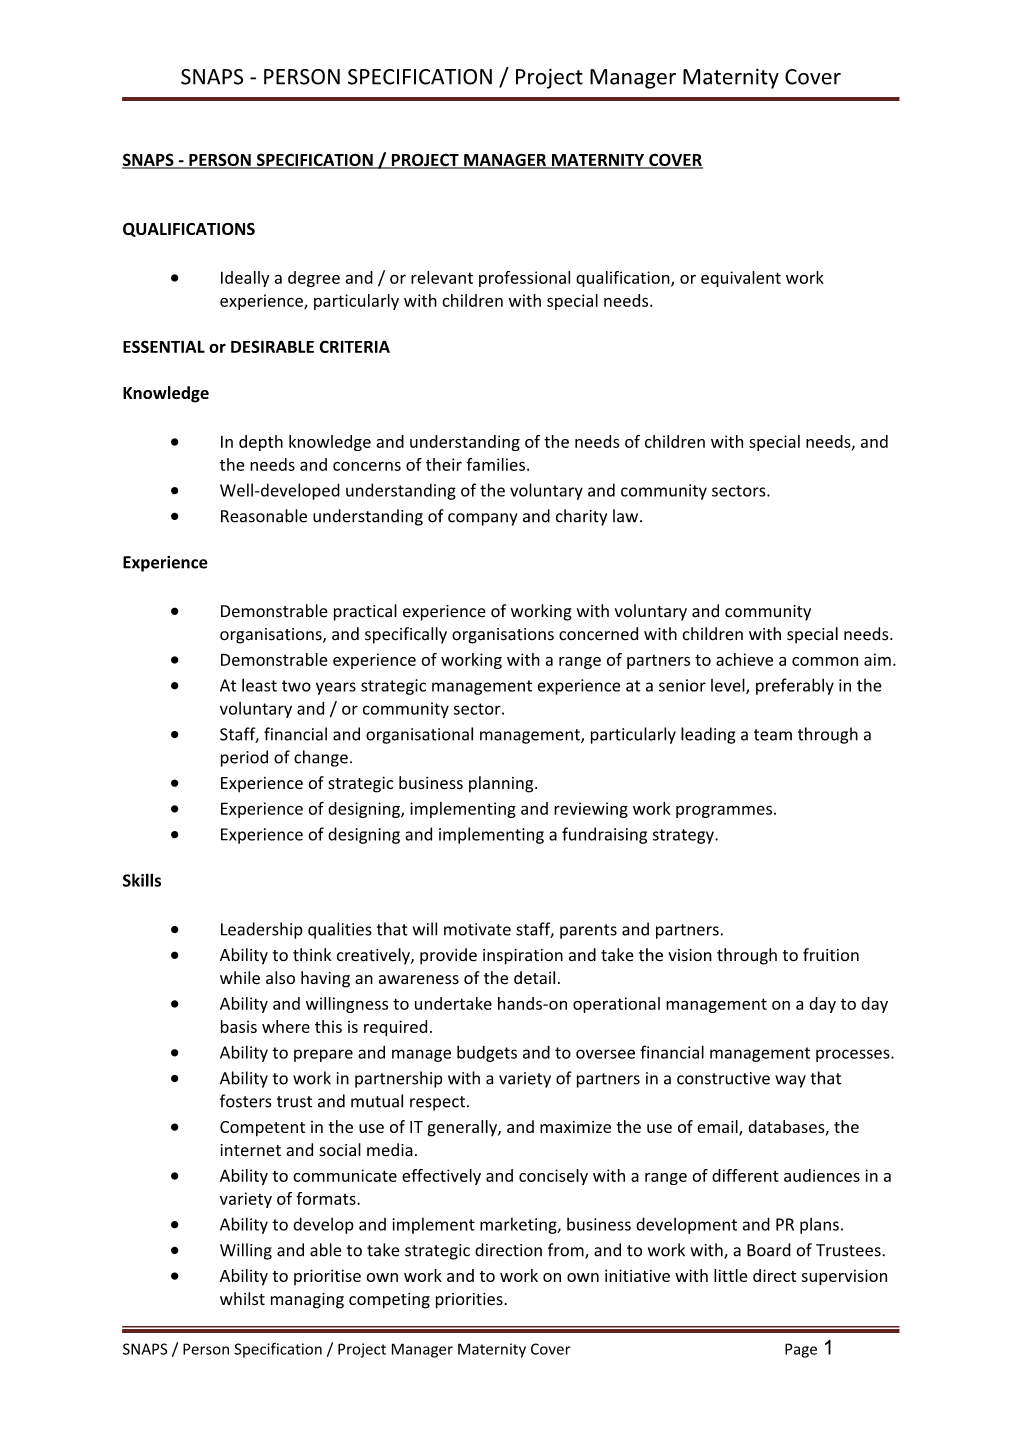 SNAPS - PERSON SPECIFICATION / Project Manager Maternity Cover